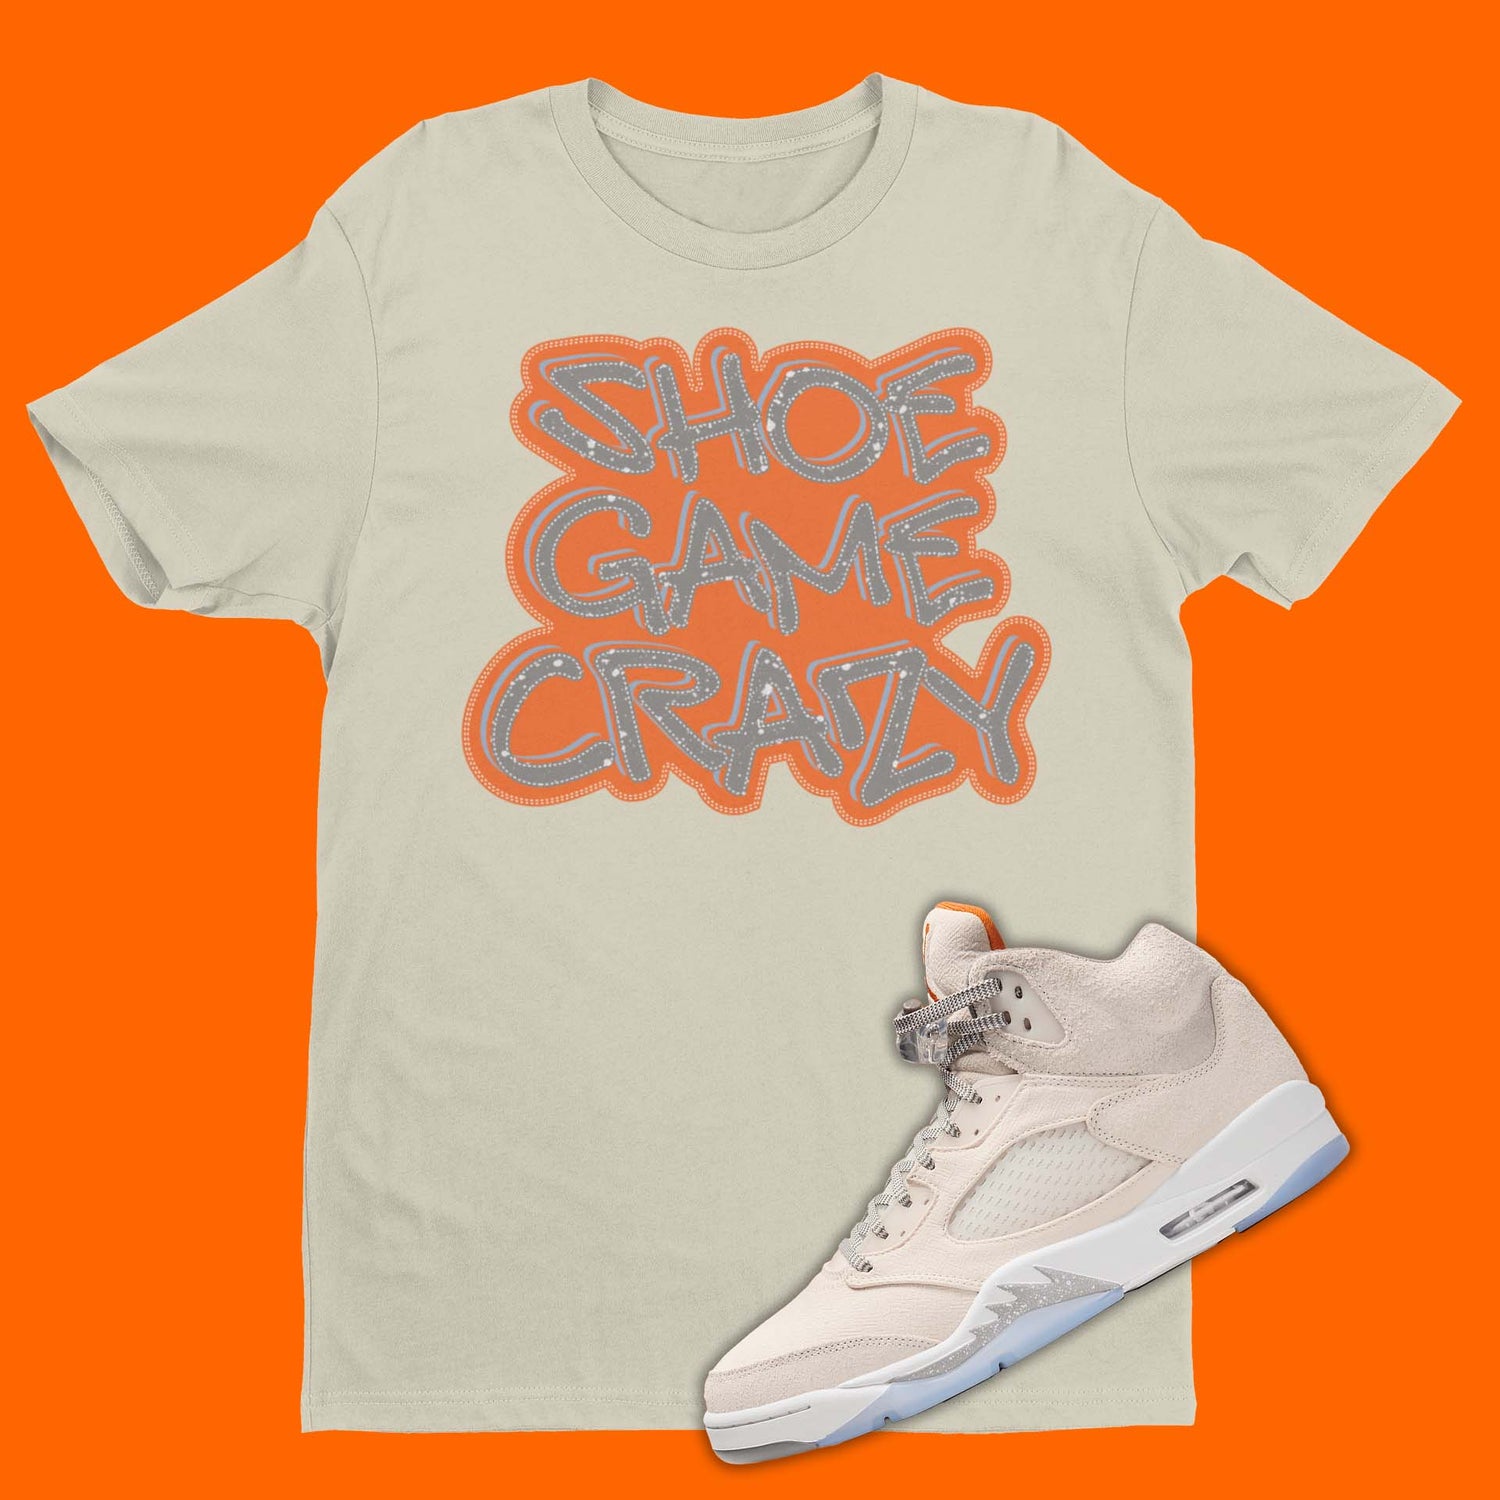 The perfect shirt to match your Air Jordan 5 Craft sneakers! Our Match Jordan 5 t-shirt is made to compliment your kicks. Bring your sneakers to the next level with this Craft 5 Light Orewood Brown shirt. Match and feel trendy with this graphic tee!